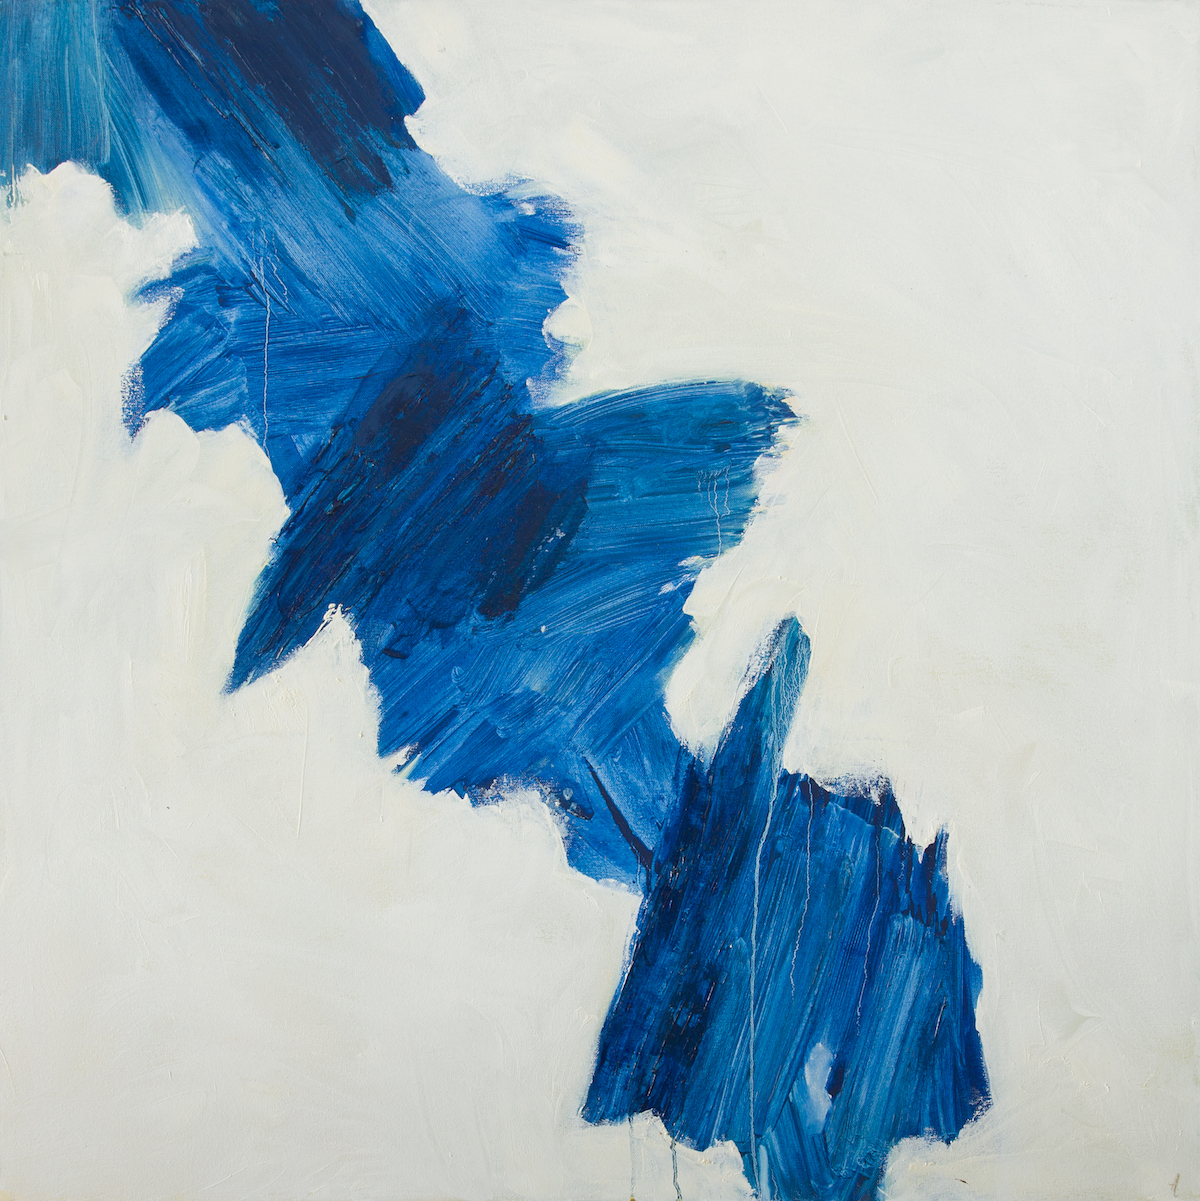 The Wick - Blue and White Composition No1, 2018 by Anniek Verholt